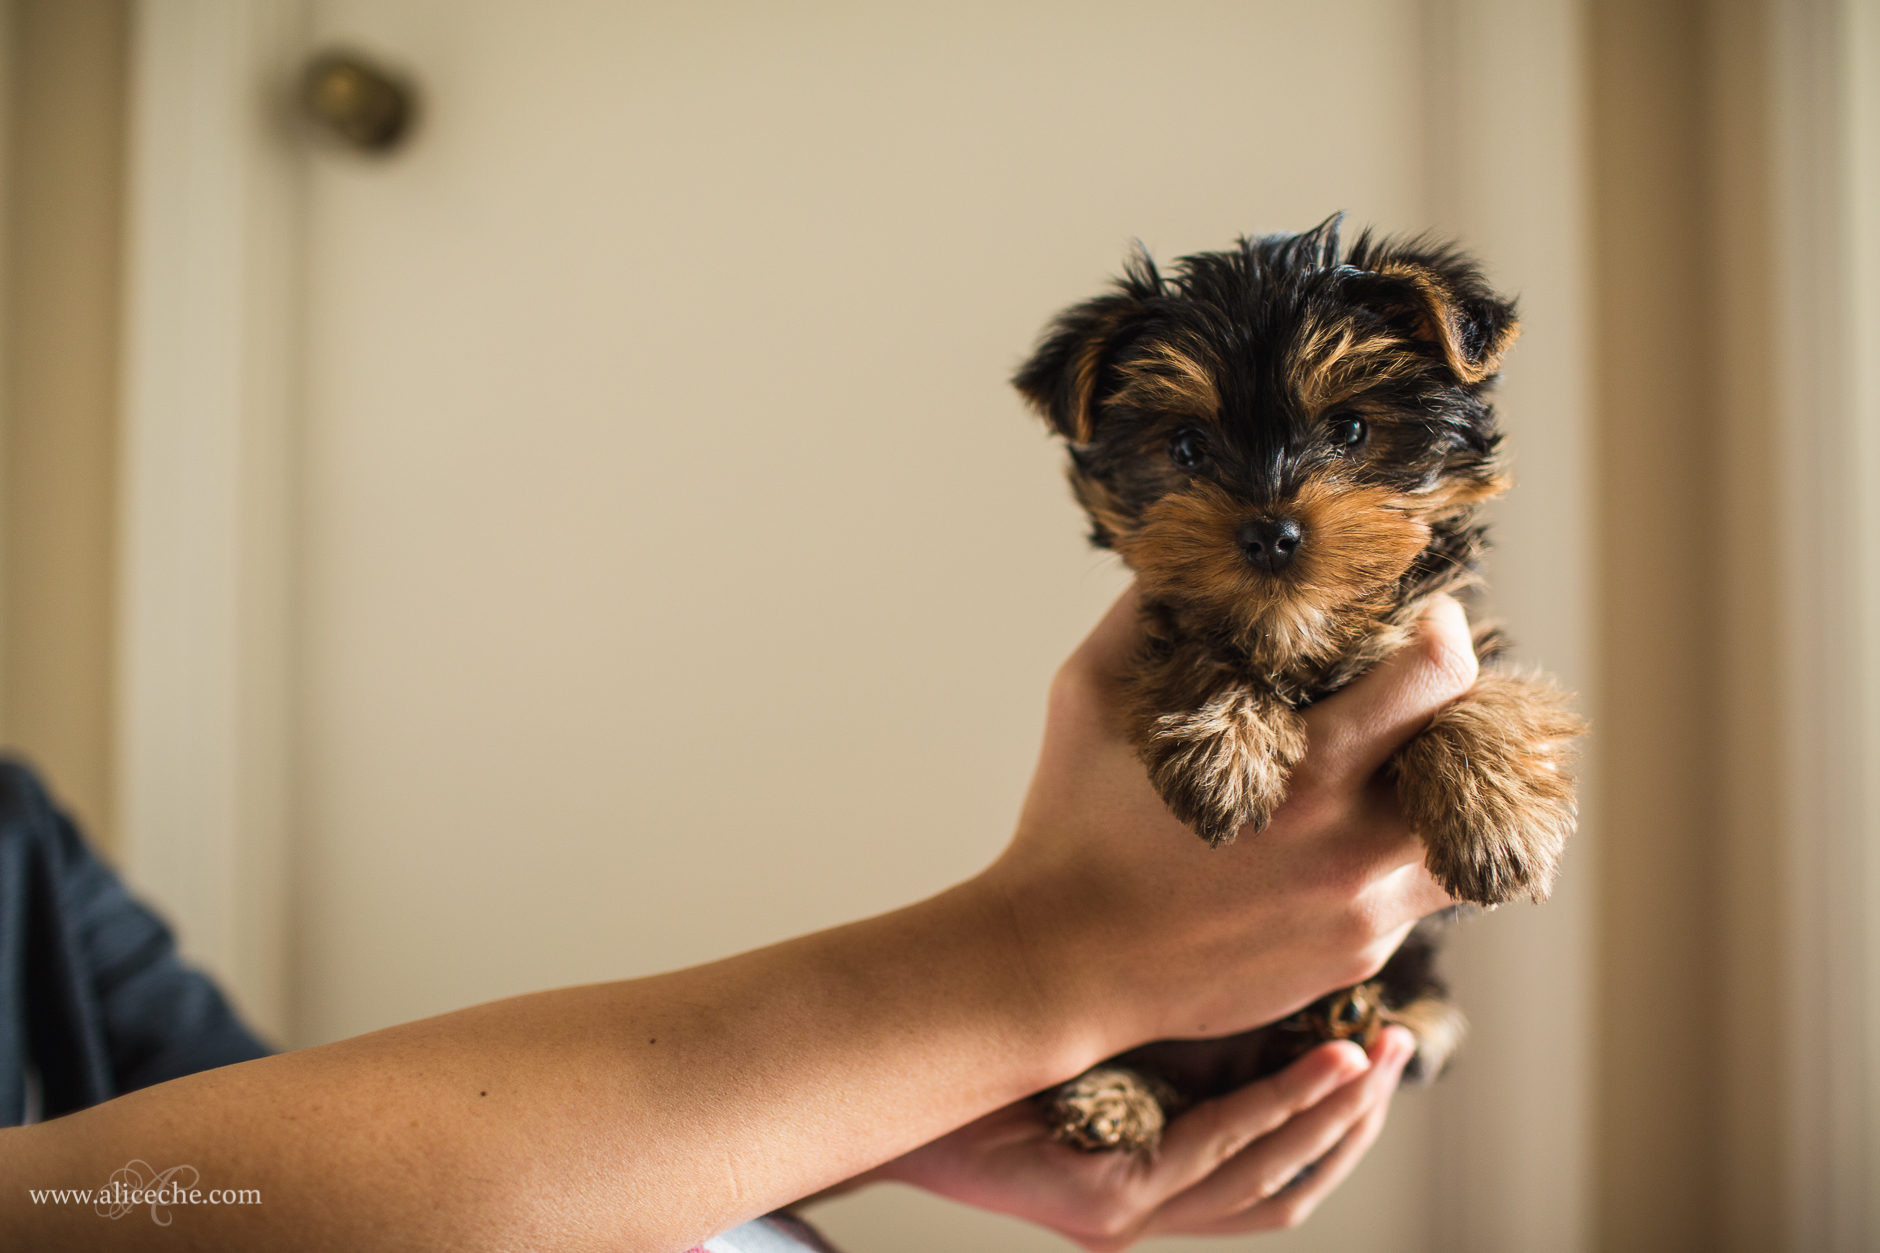 alice-che-photography-yorkshire-terrier-puppy-being-held